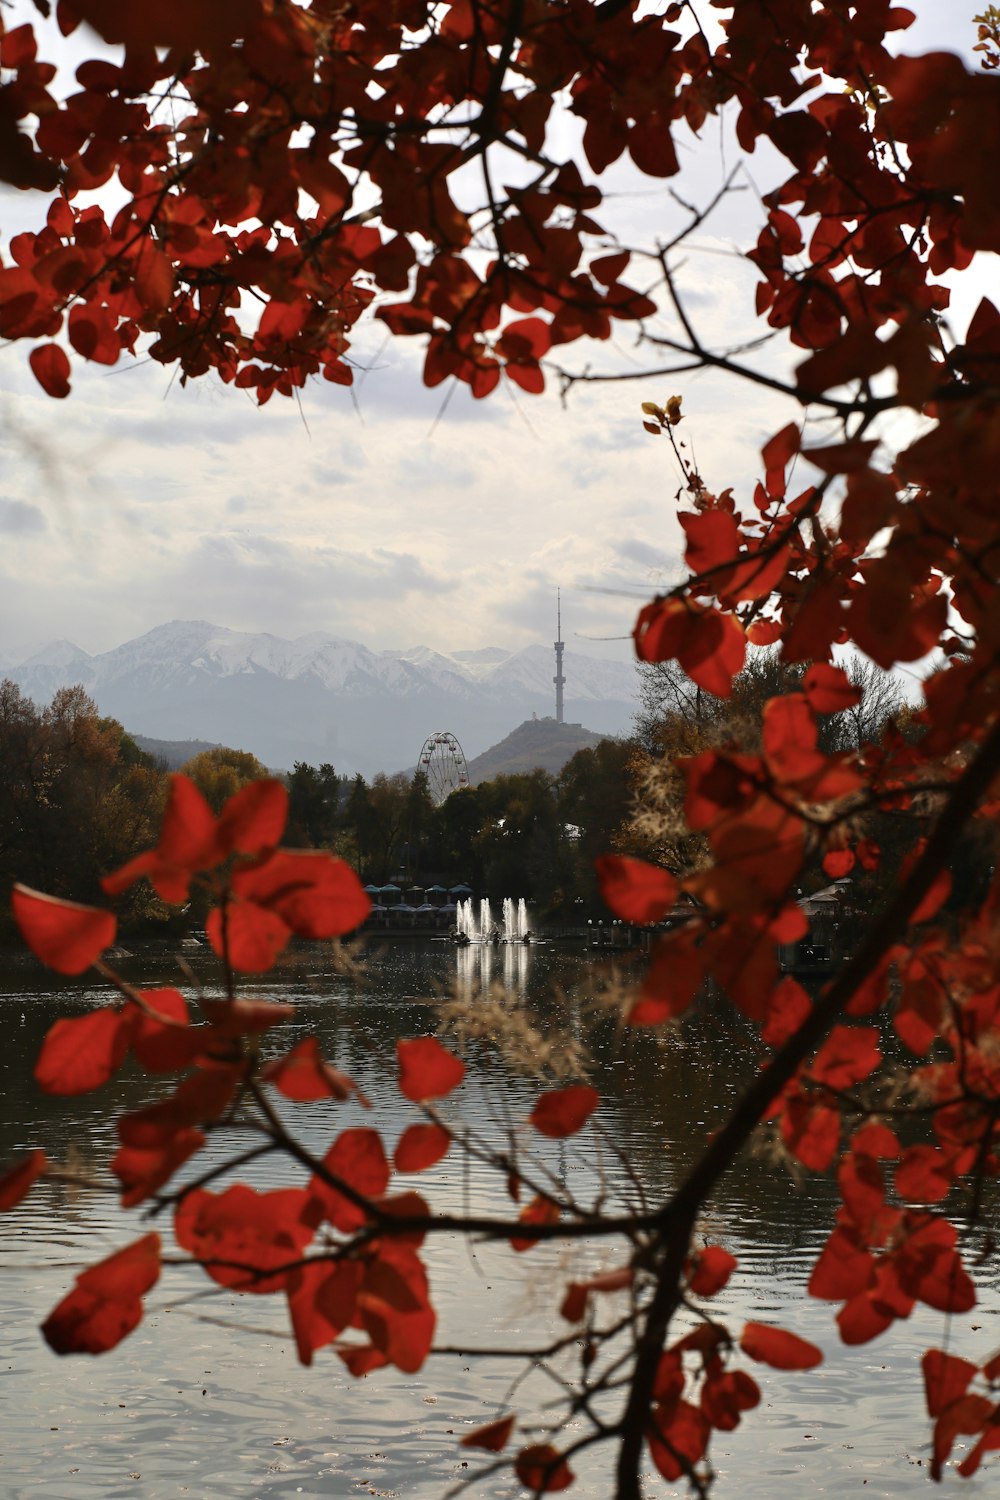 a body of water surrounded by trees with red leaves